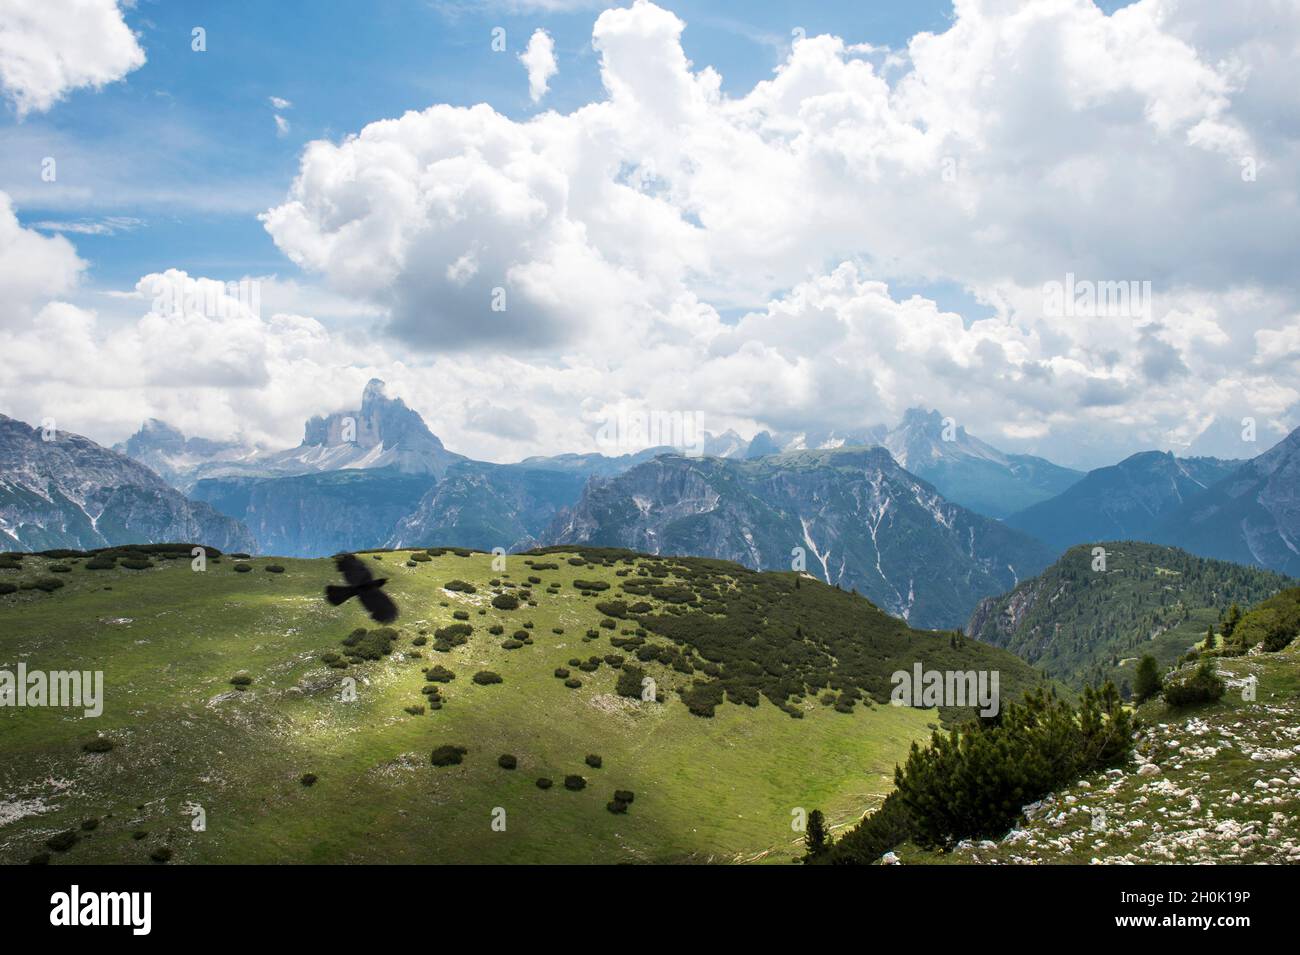 Italy, Alto Adige, landscape from the top of Specie Mountain Stock Photo